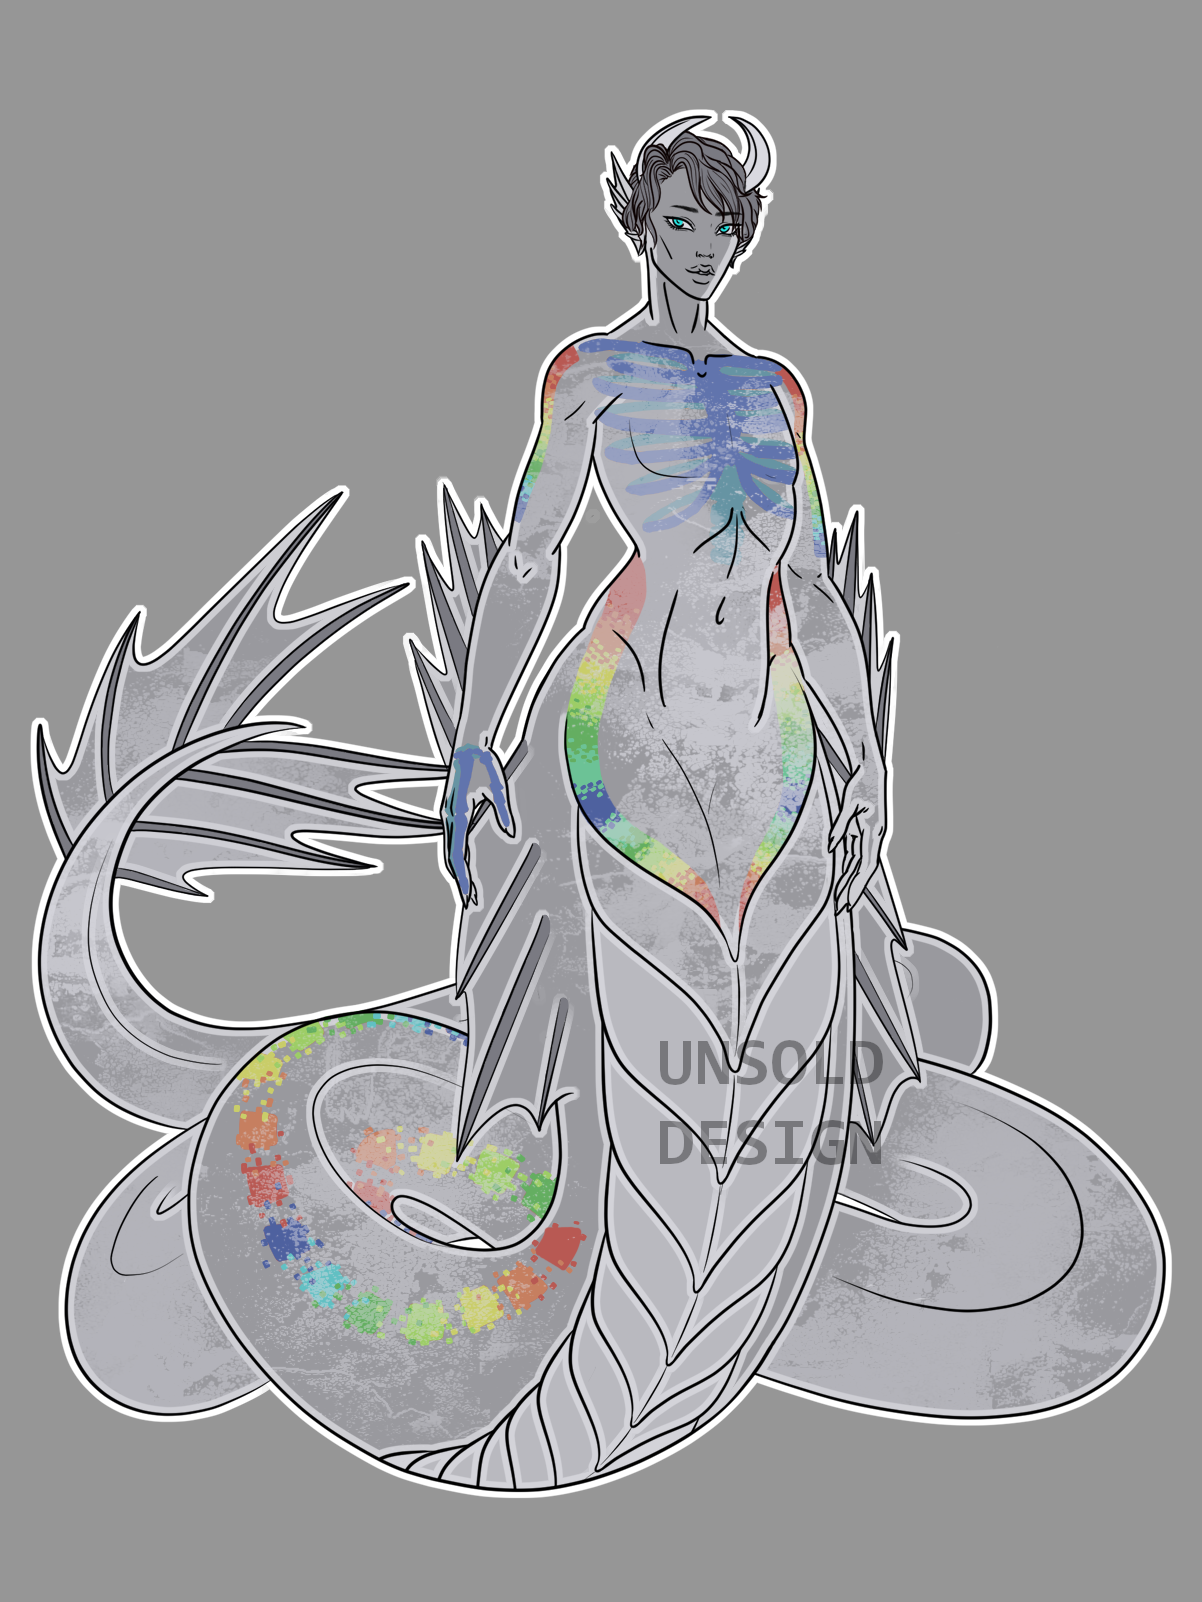 A gender ambigious half-human half snake person. They have fins on their arms, ears, and end of their tale as they are aquatic. They are semi-transparent and have colorful rainbow scales similar to a jelly comb.